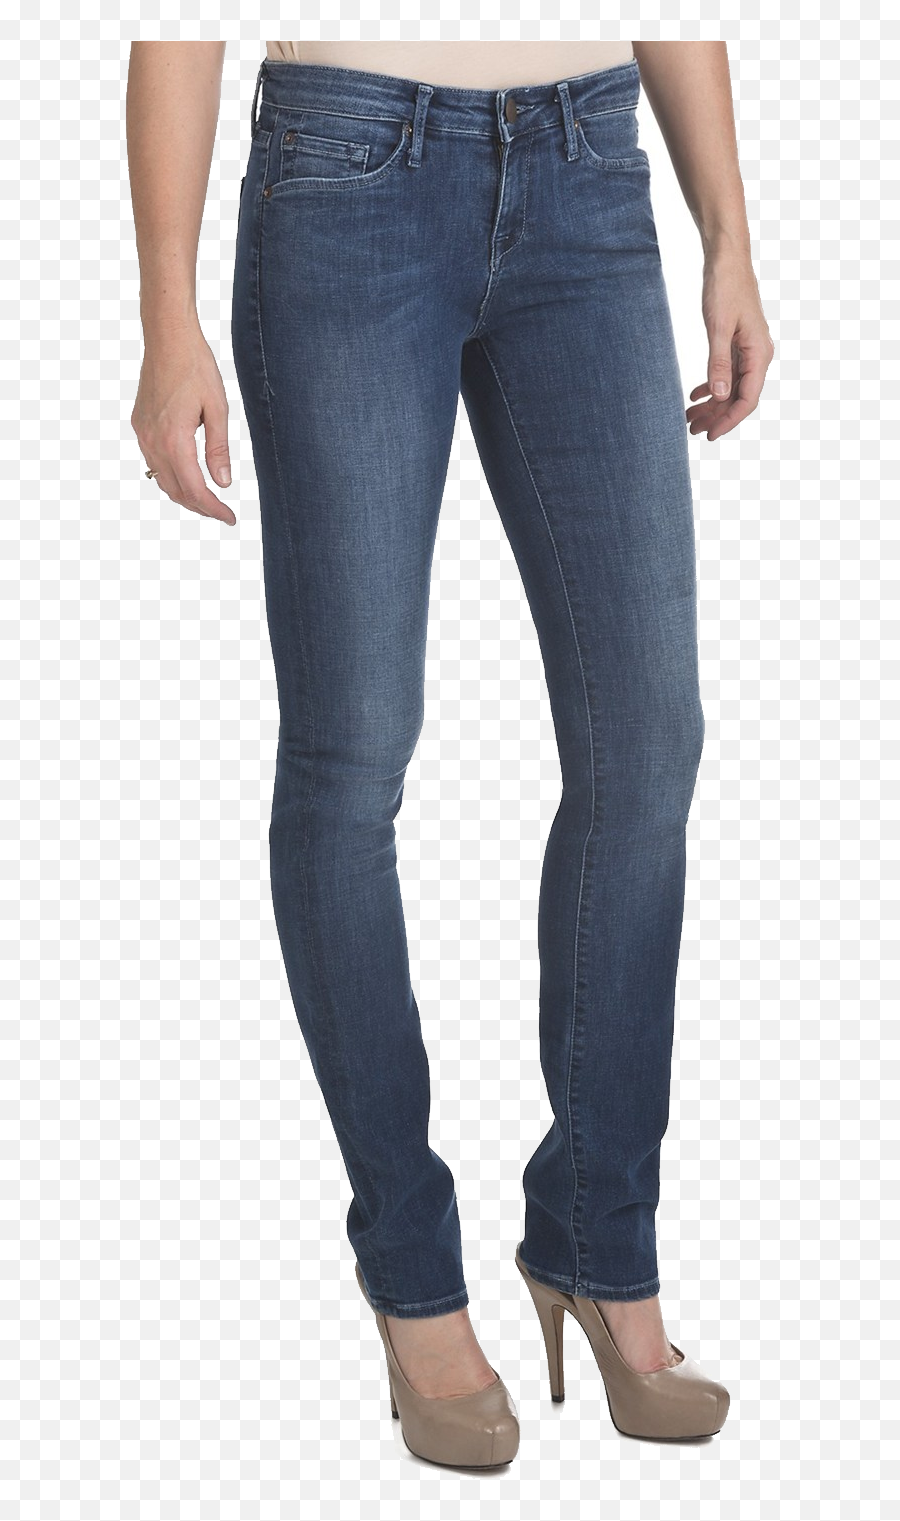 Skinny Jeans Png - Legs With Pants Png Clipart Full Size Jeans For Girls Png Emoji,Emoji Pants For Girl